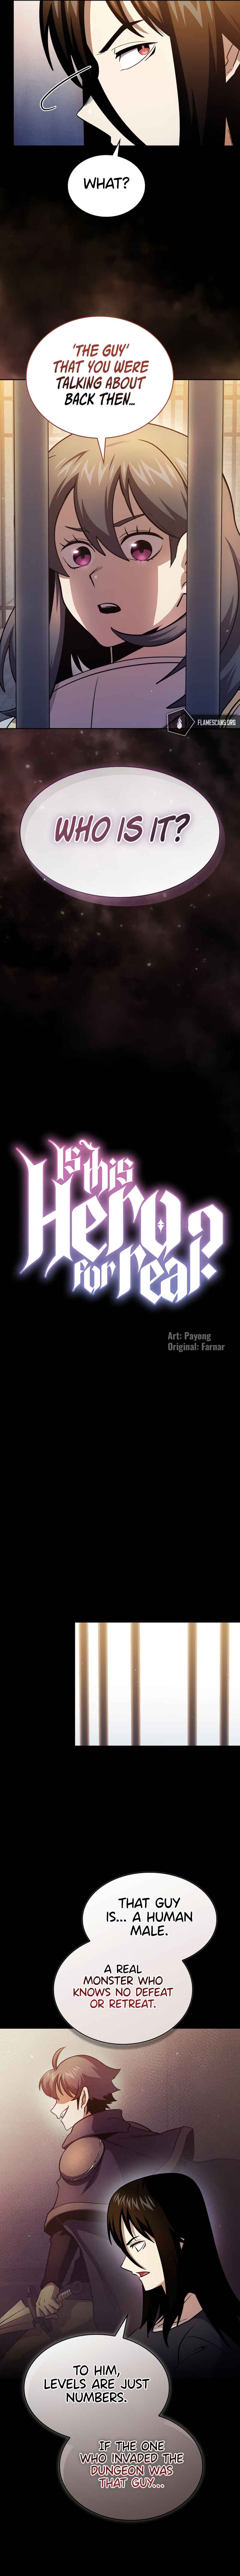 Is This Hero for Real? chapter 84